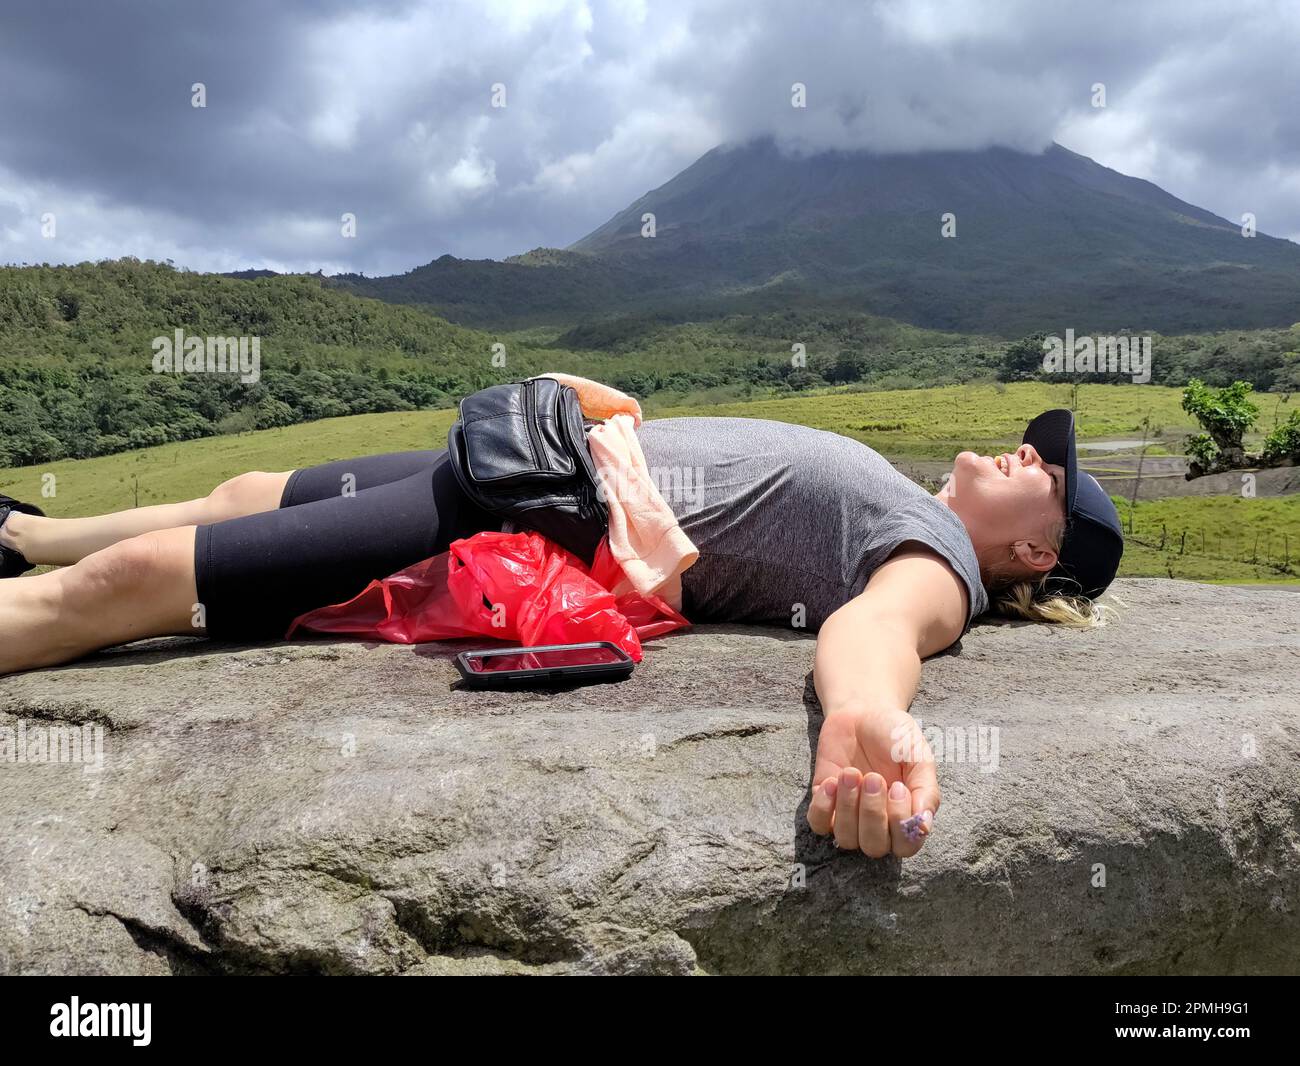 Arenal Volcano National Park, Costa Rica - A hiker relaxes after completing a hike on the Arenal volcano. Stock Photo